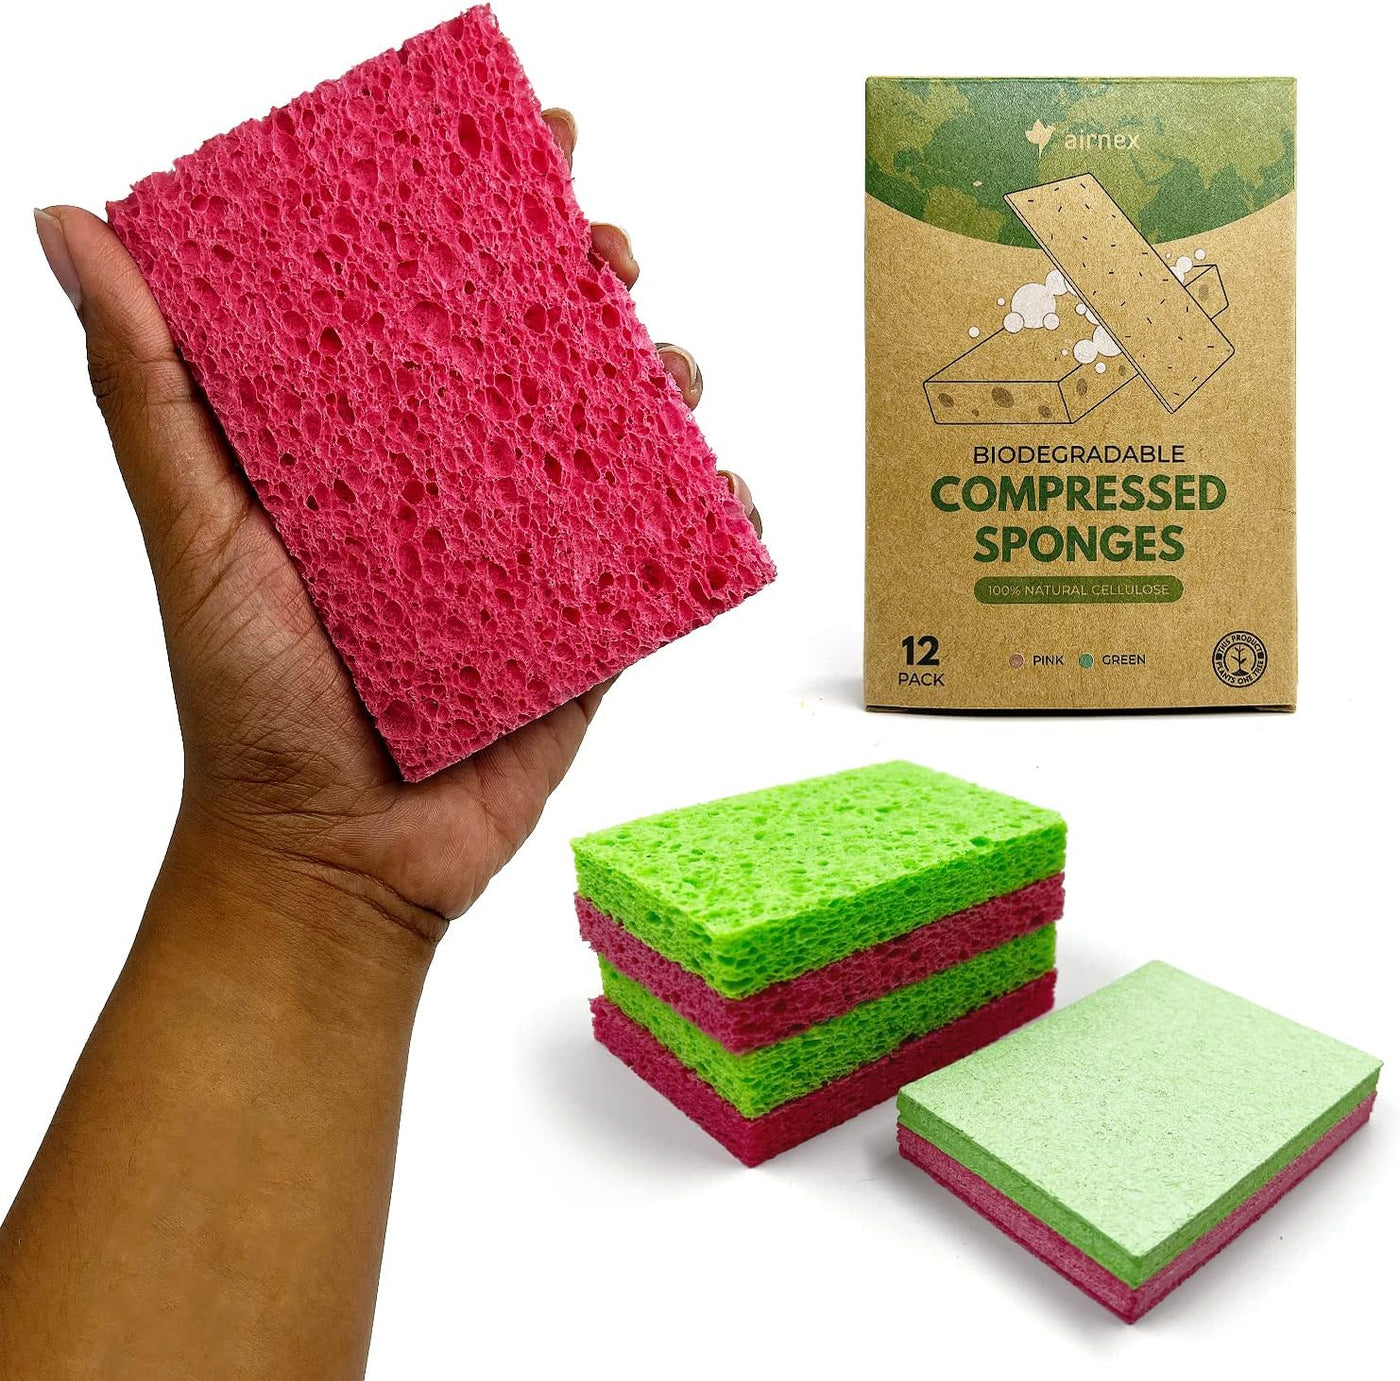 100% Biodegradable Kitchen Cleaning Sponge Supplies